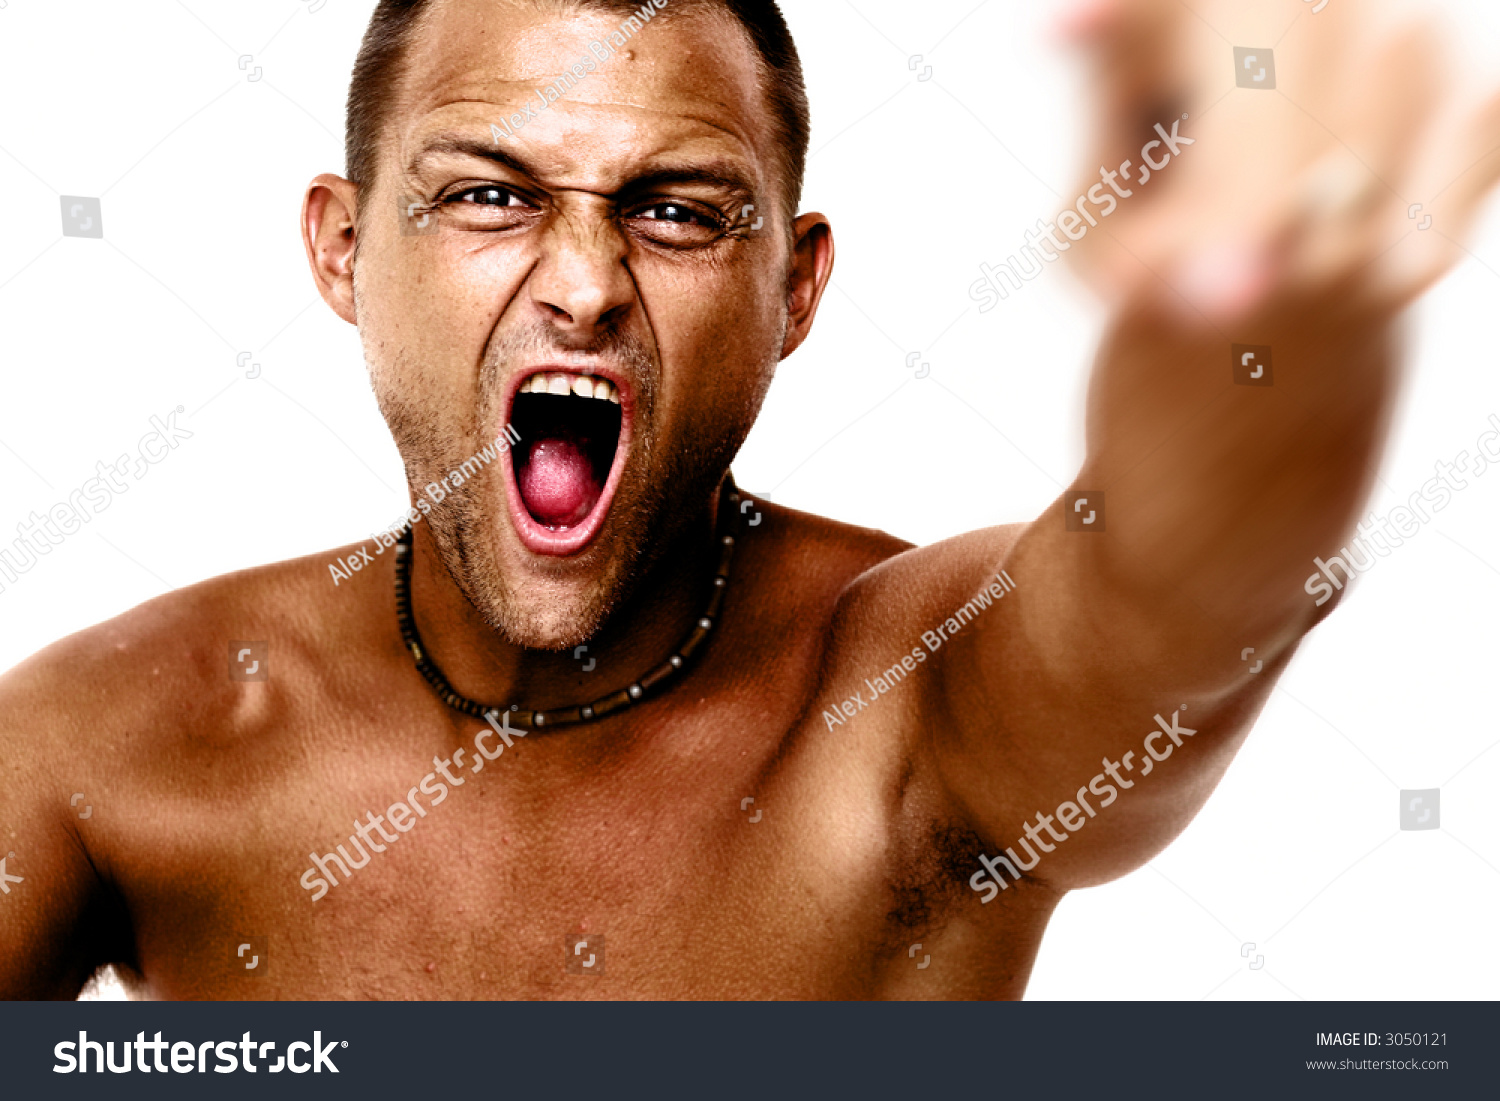 Angry Man Sepia Tones Images Stock Photos Vectors Shutterstock